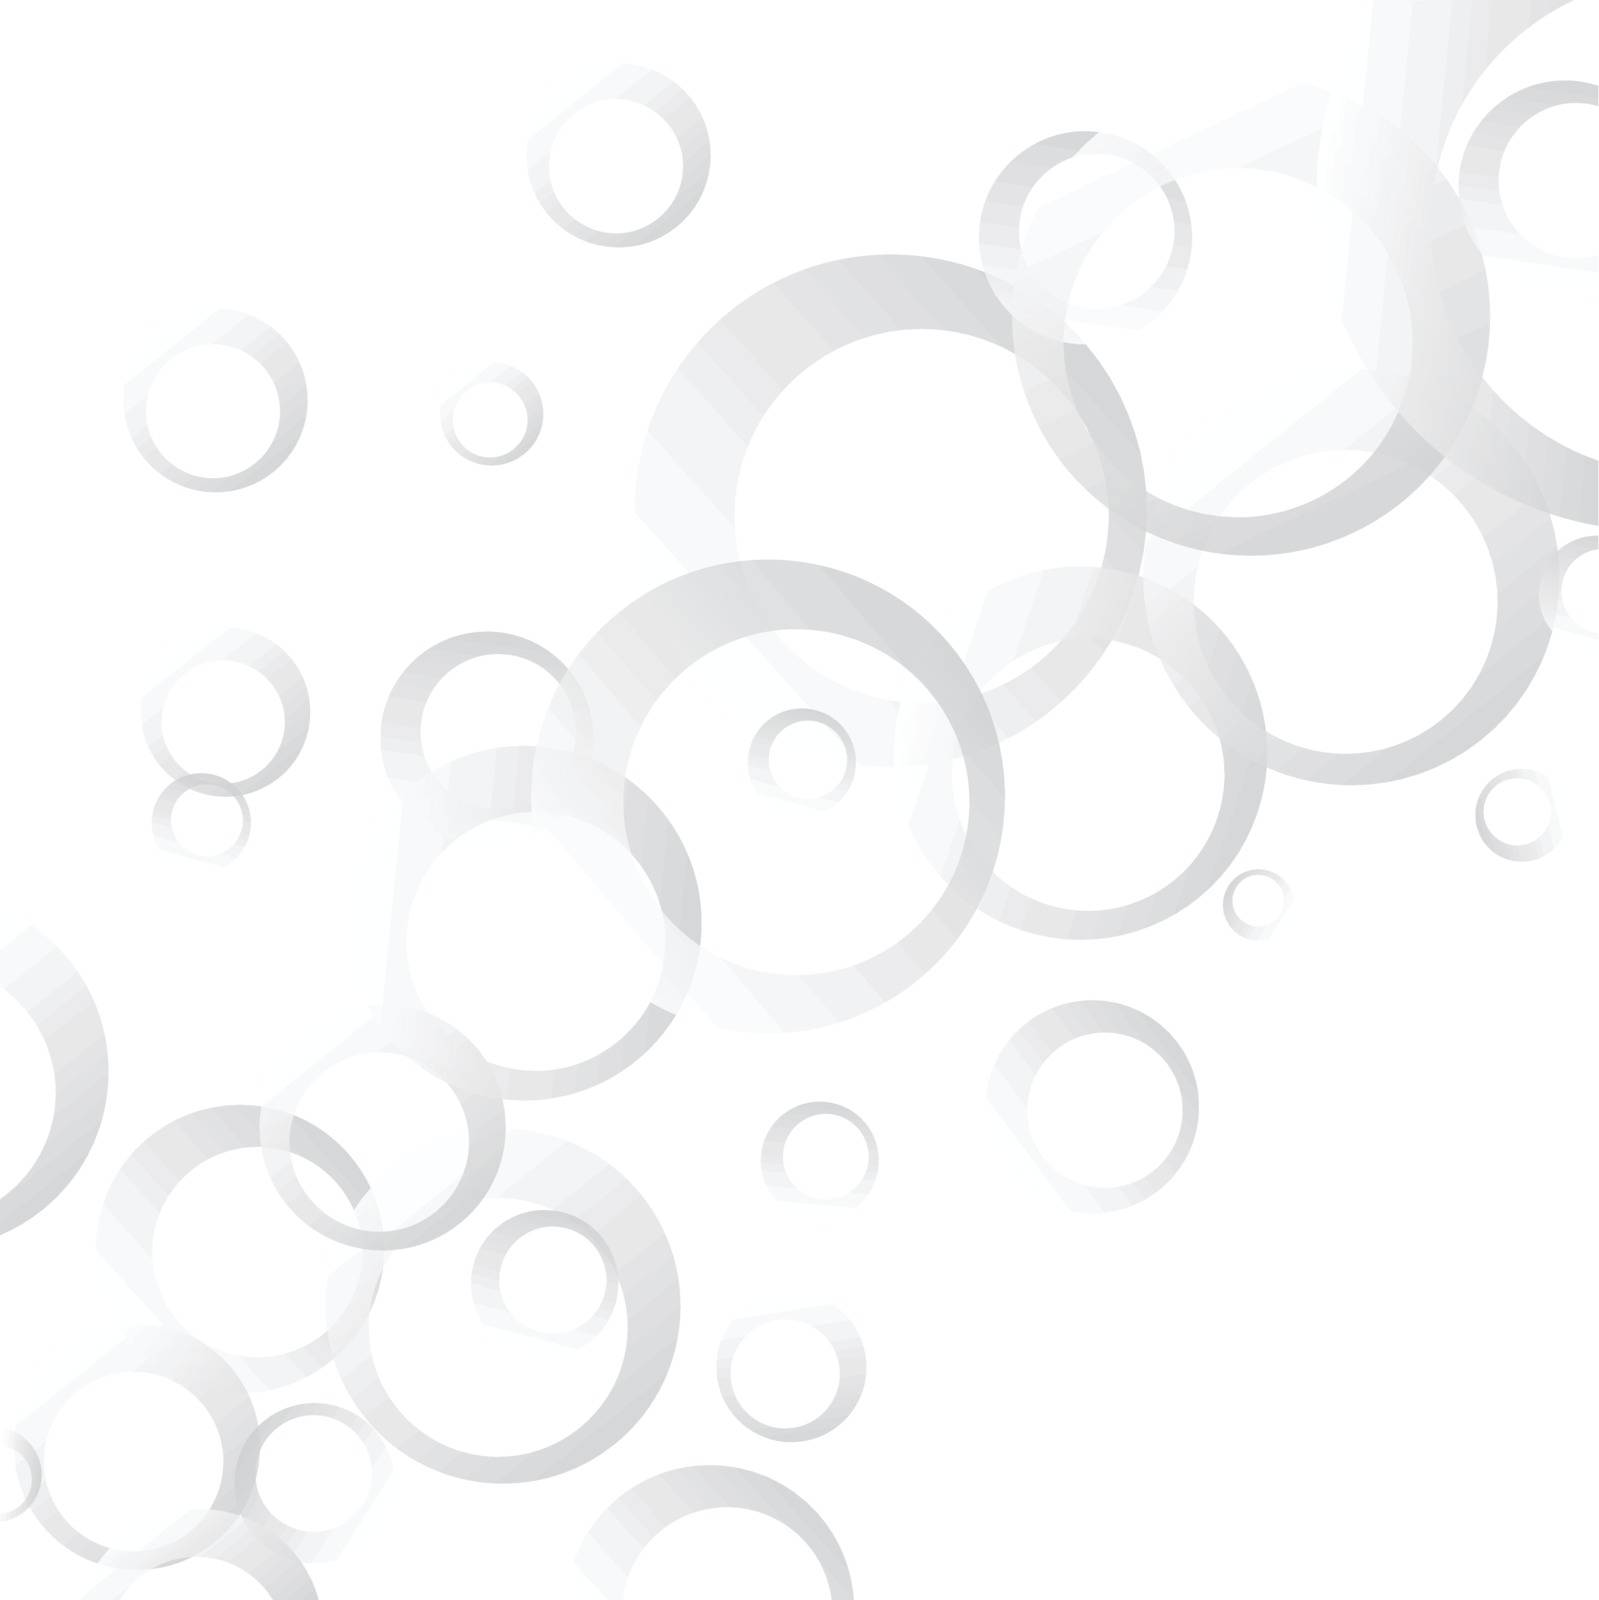 An abstract background of gray circles over a white background